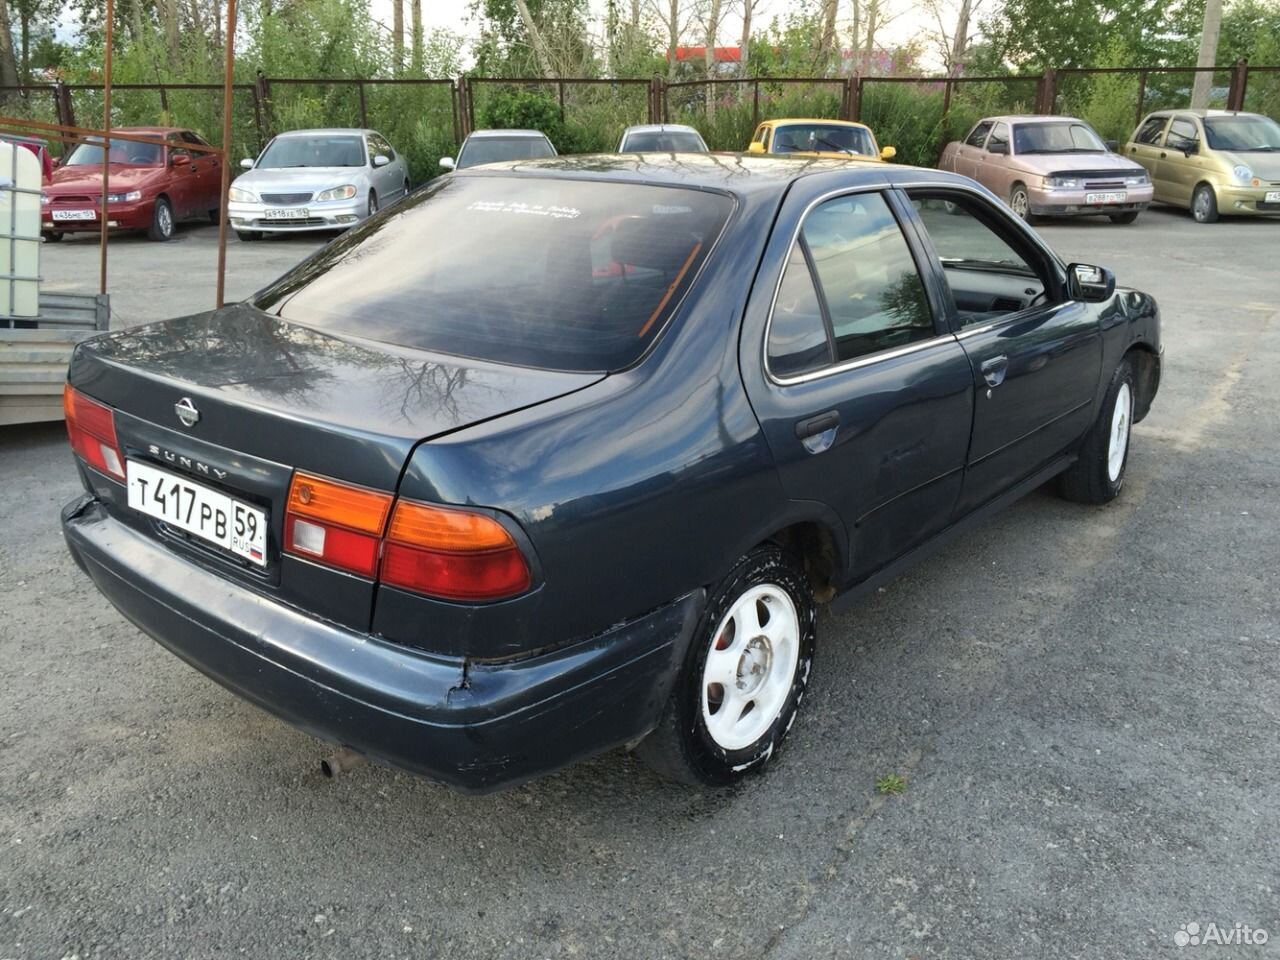 Nissan sunny 1996 pictures #2